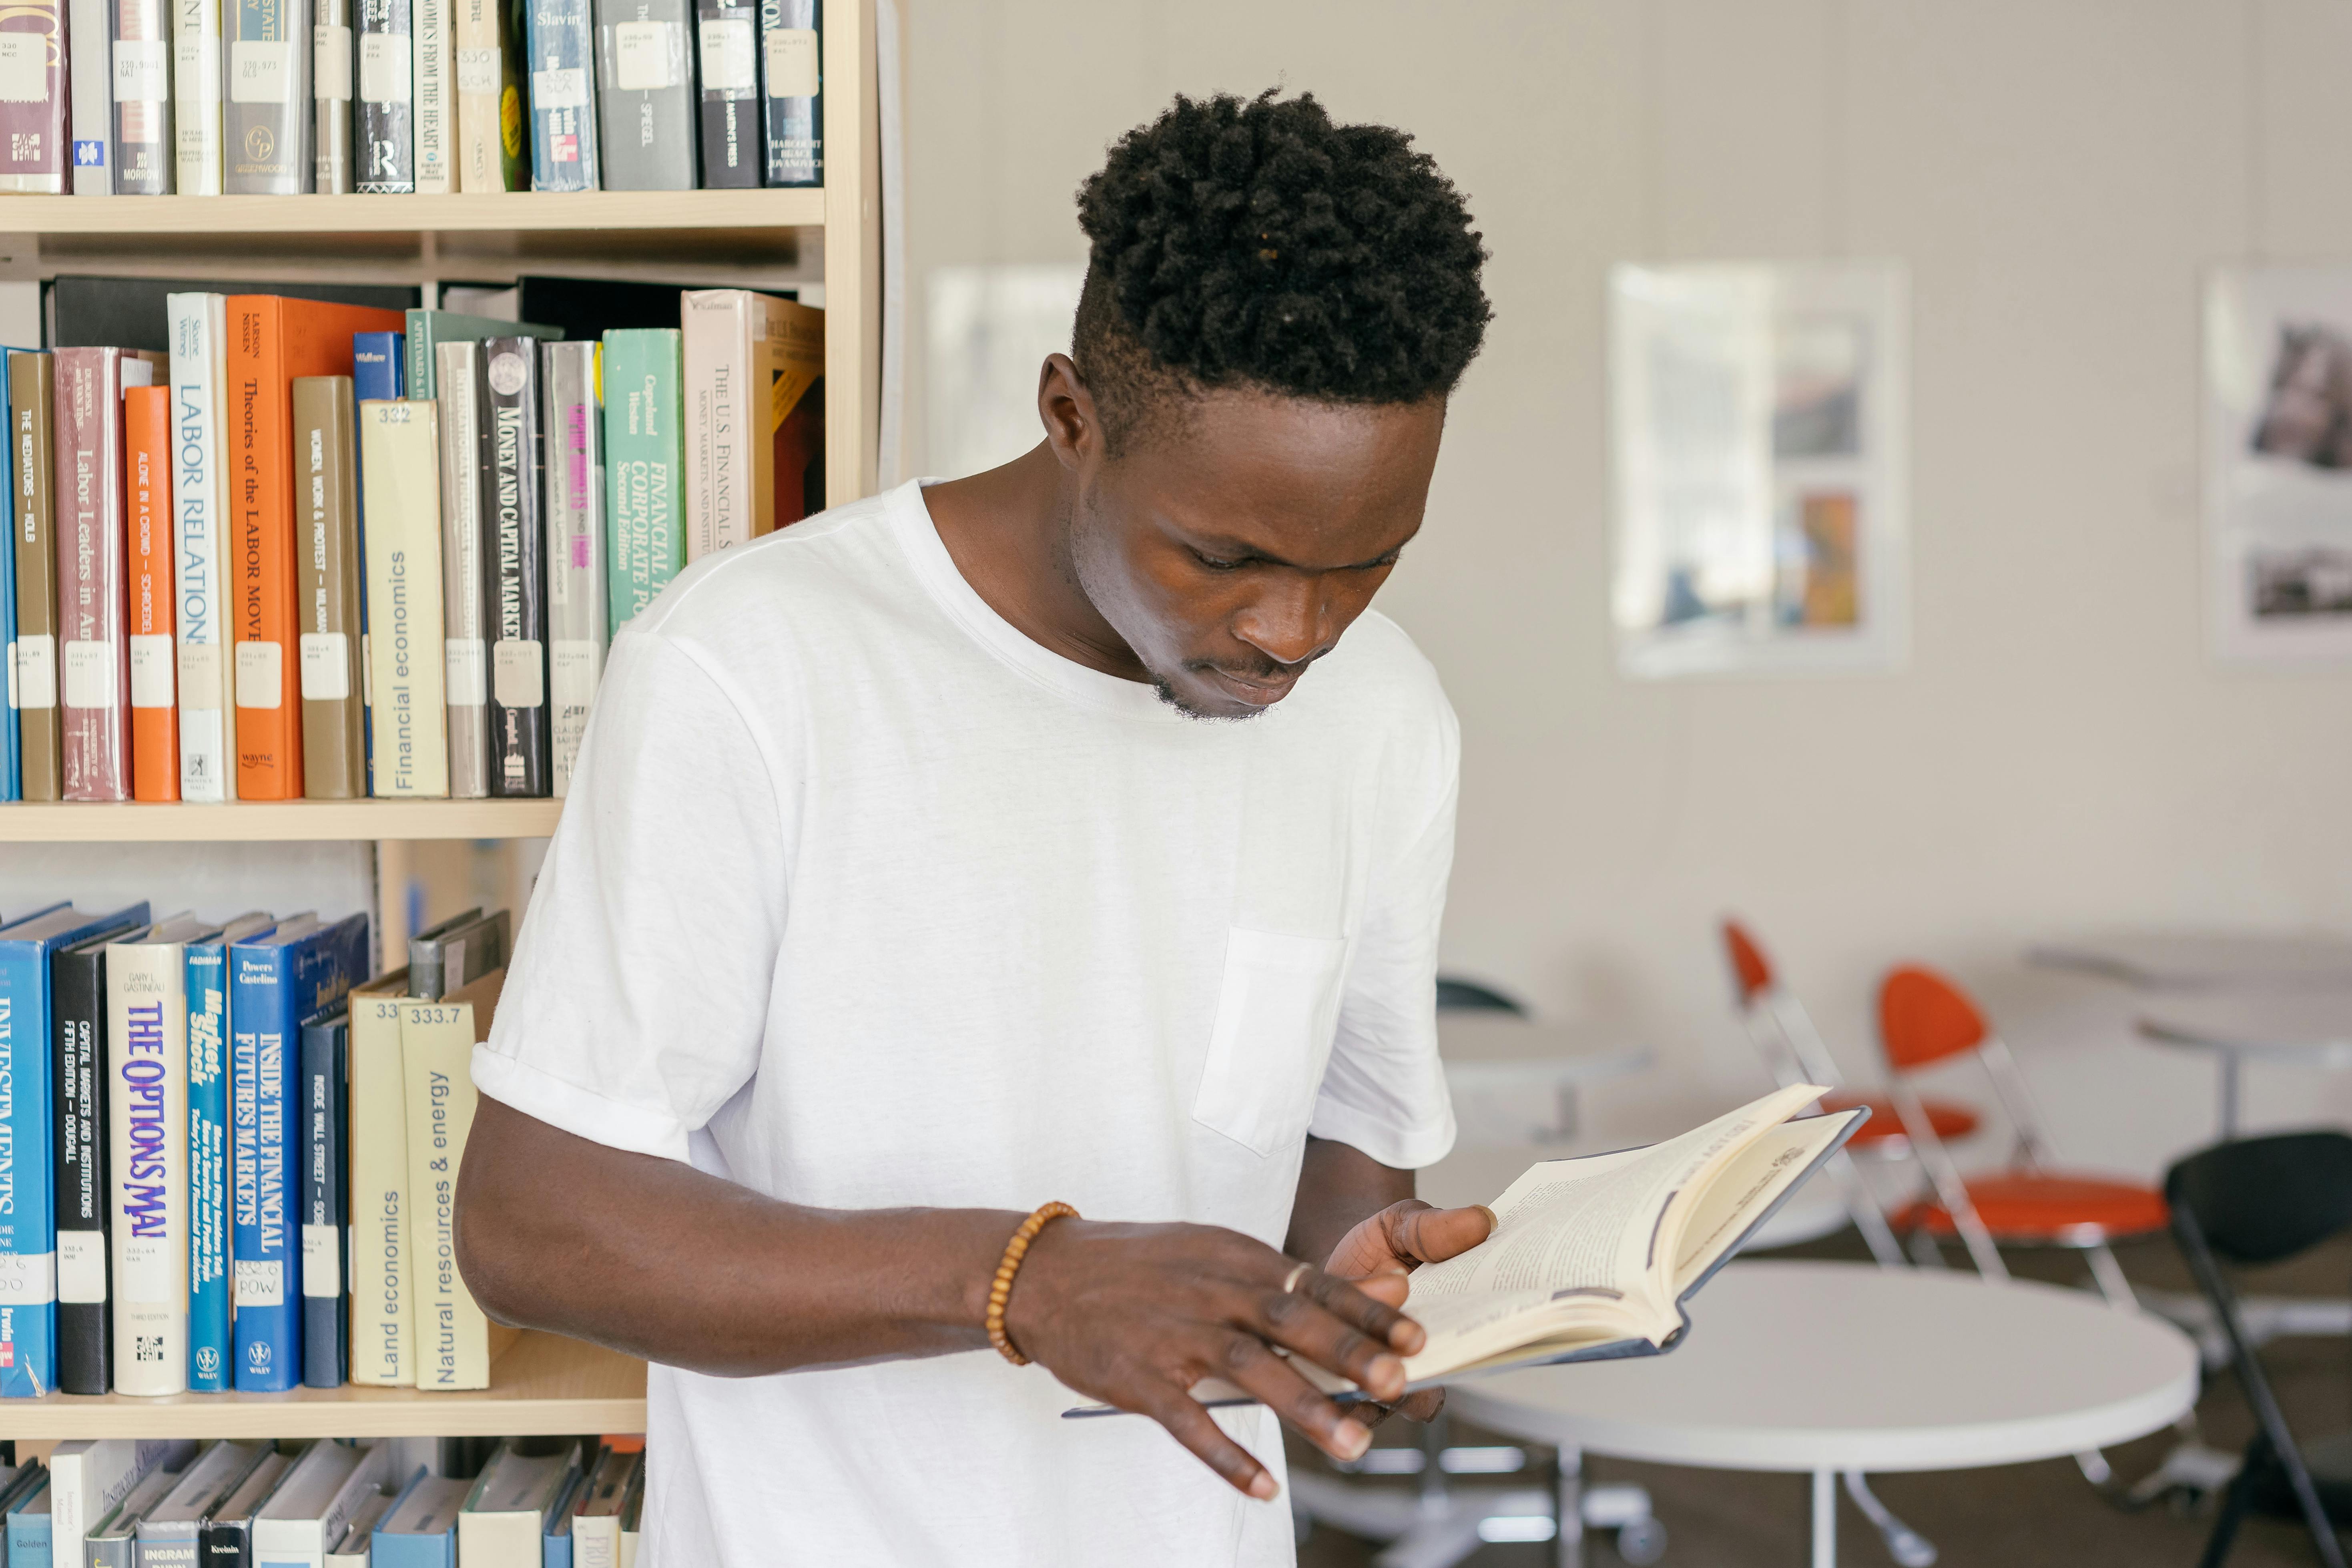 A man in a white shirt is reading a book in a library